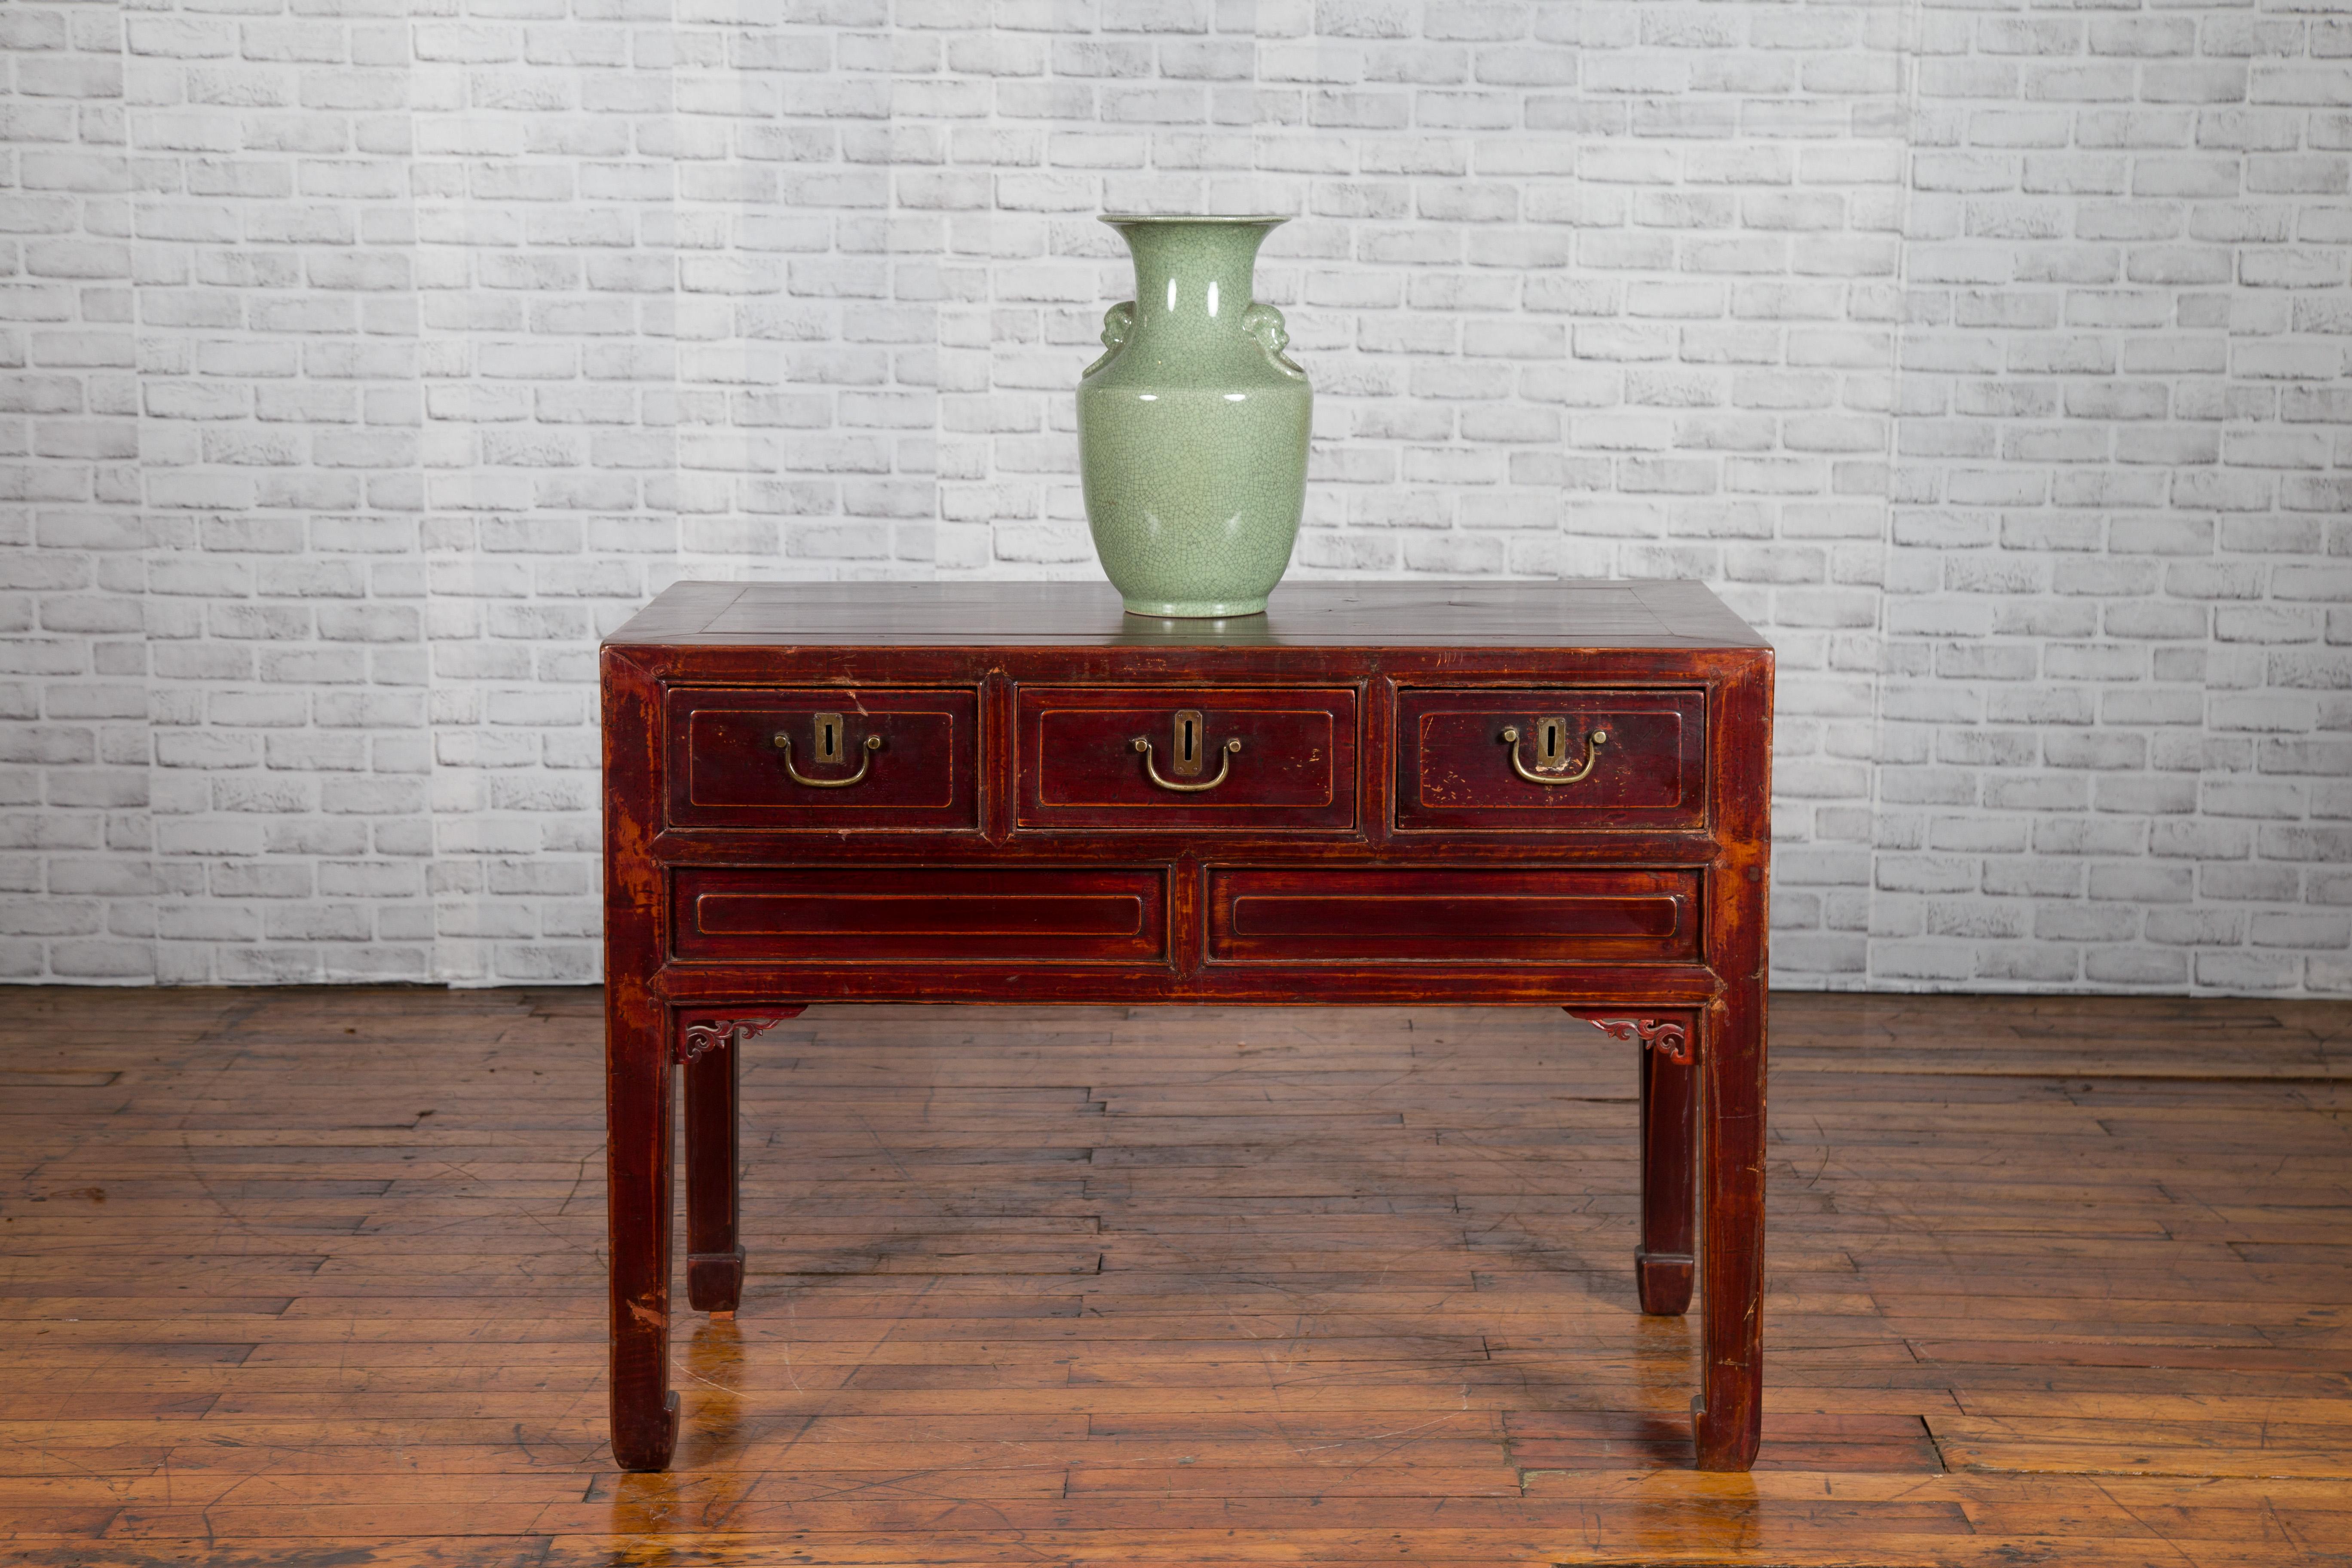 Chinese Antique Console Table with Drawers, Horse Hoof Legs and Dark Red Patina For Sale 2